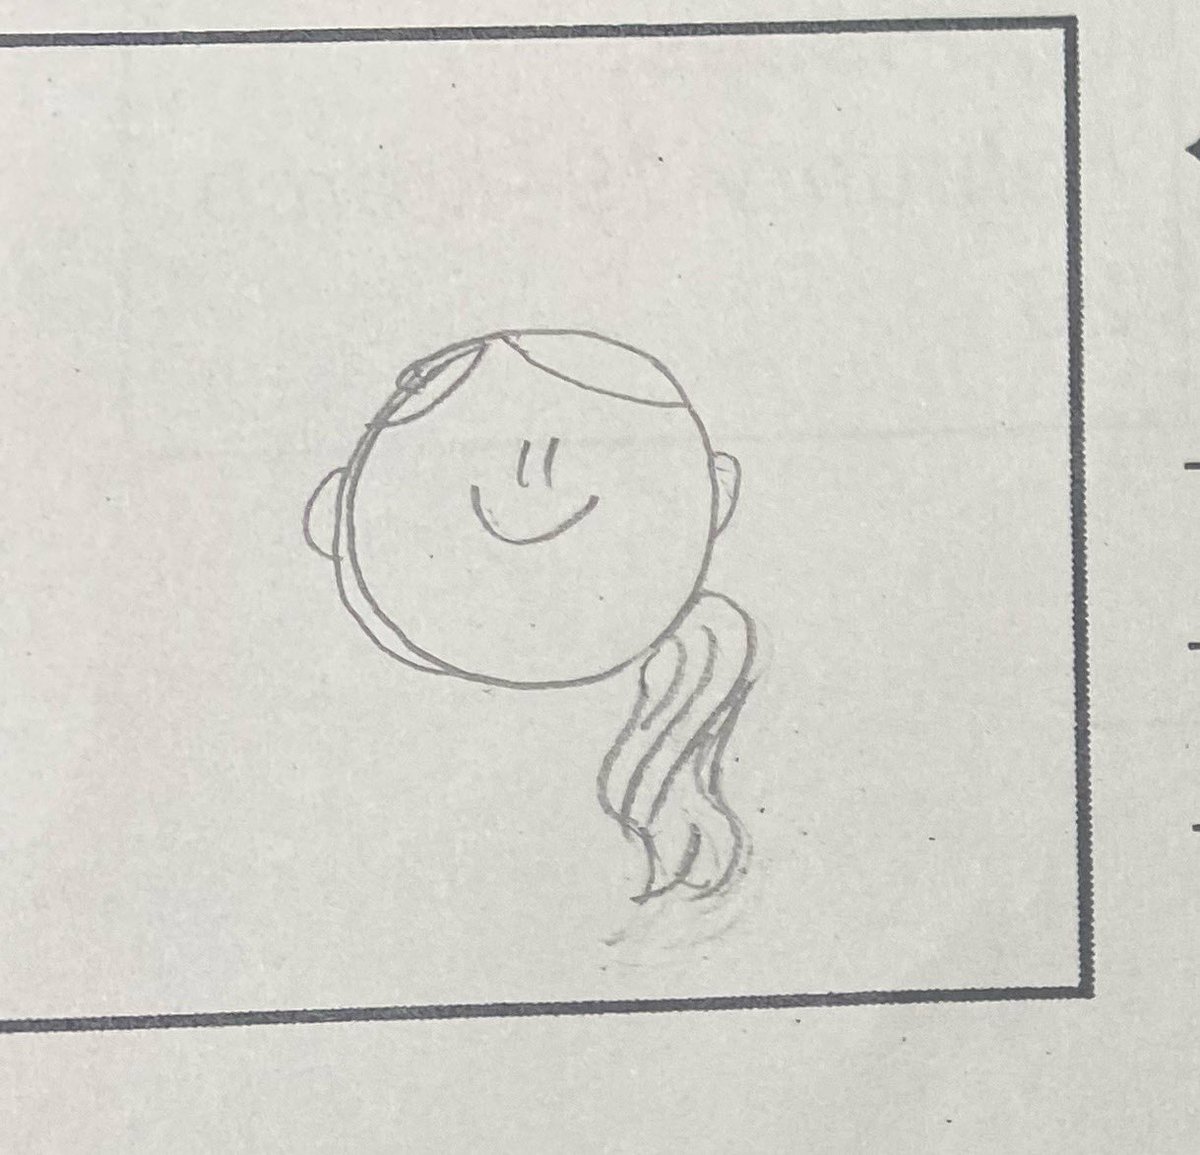 I taught my students how to write about personalities in English and asked them to describe one of their classmates/friends and then draw a portrait of them and 3 students chose me 😭😭😭😭😭